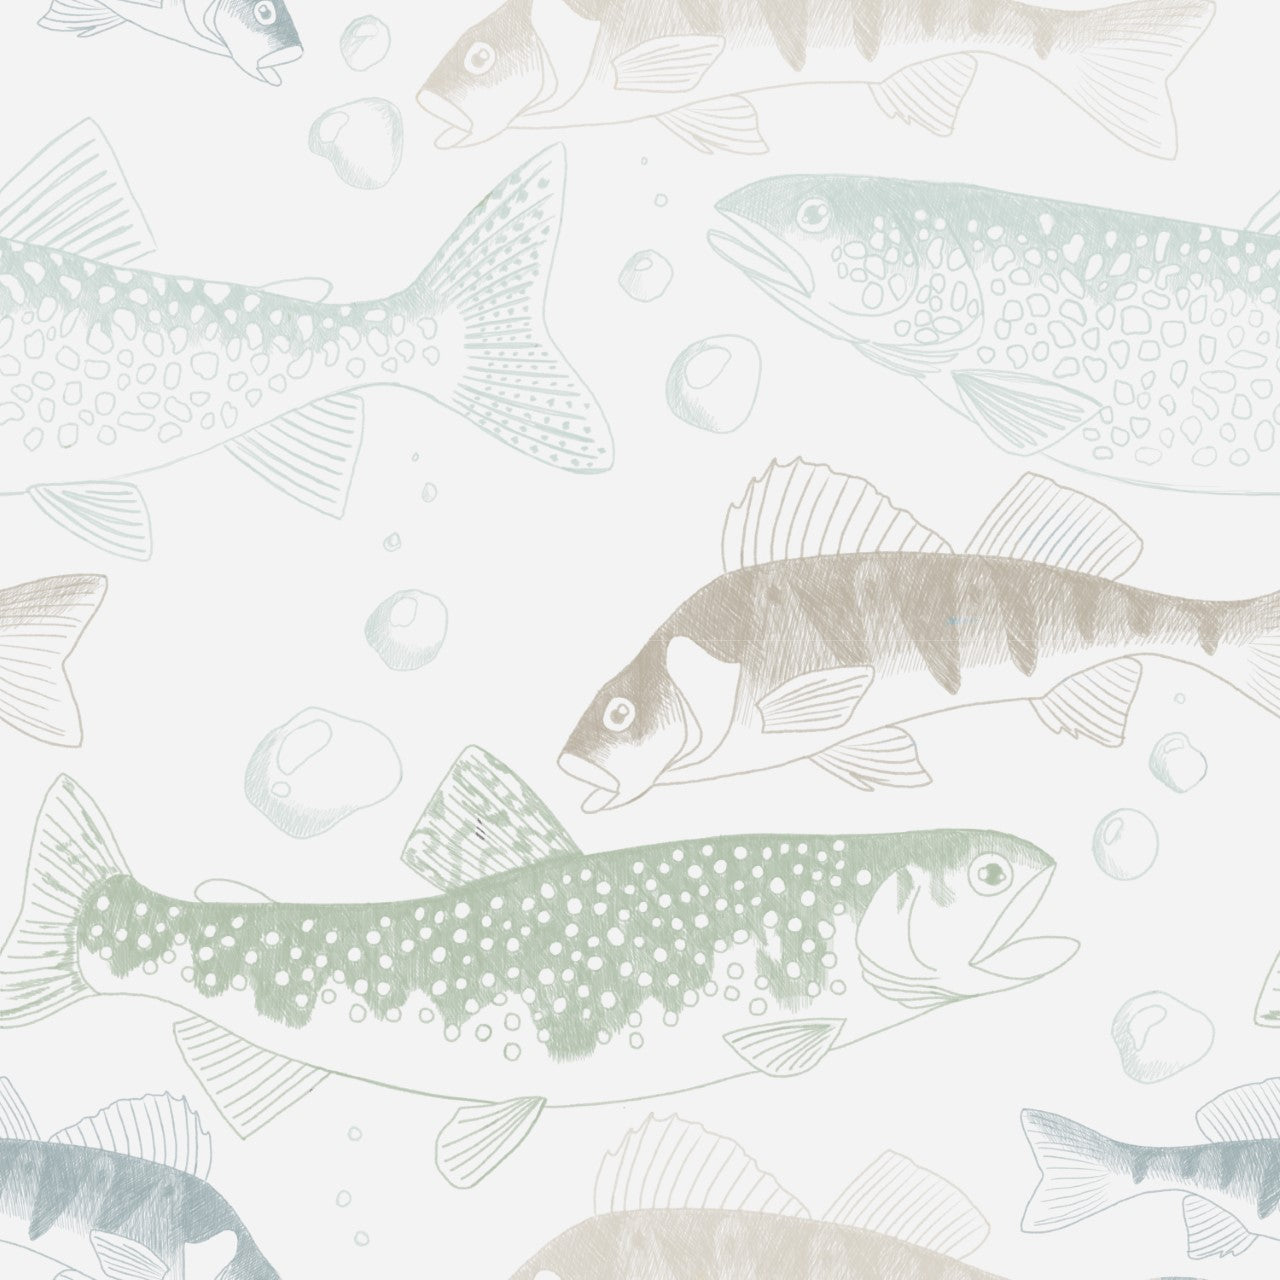 Neutral green, blue and cream fish design on white background easy to install and remove peel and stick custom wallpaper available in different lengths/sizes locally created and printed in Canada Artichoke wallpaper. Washable, durable, commercial grade, removable and waterproof.